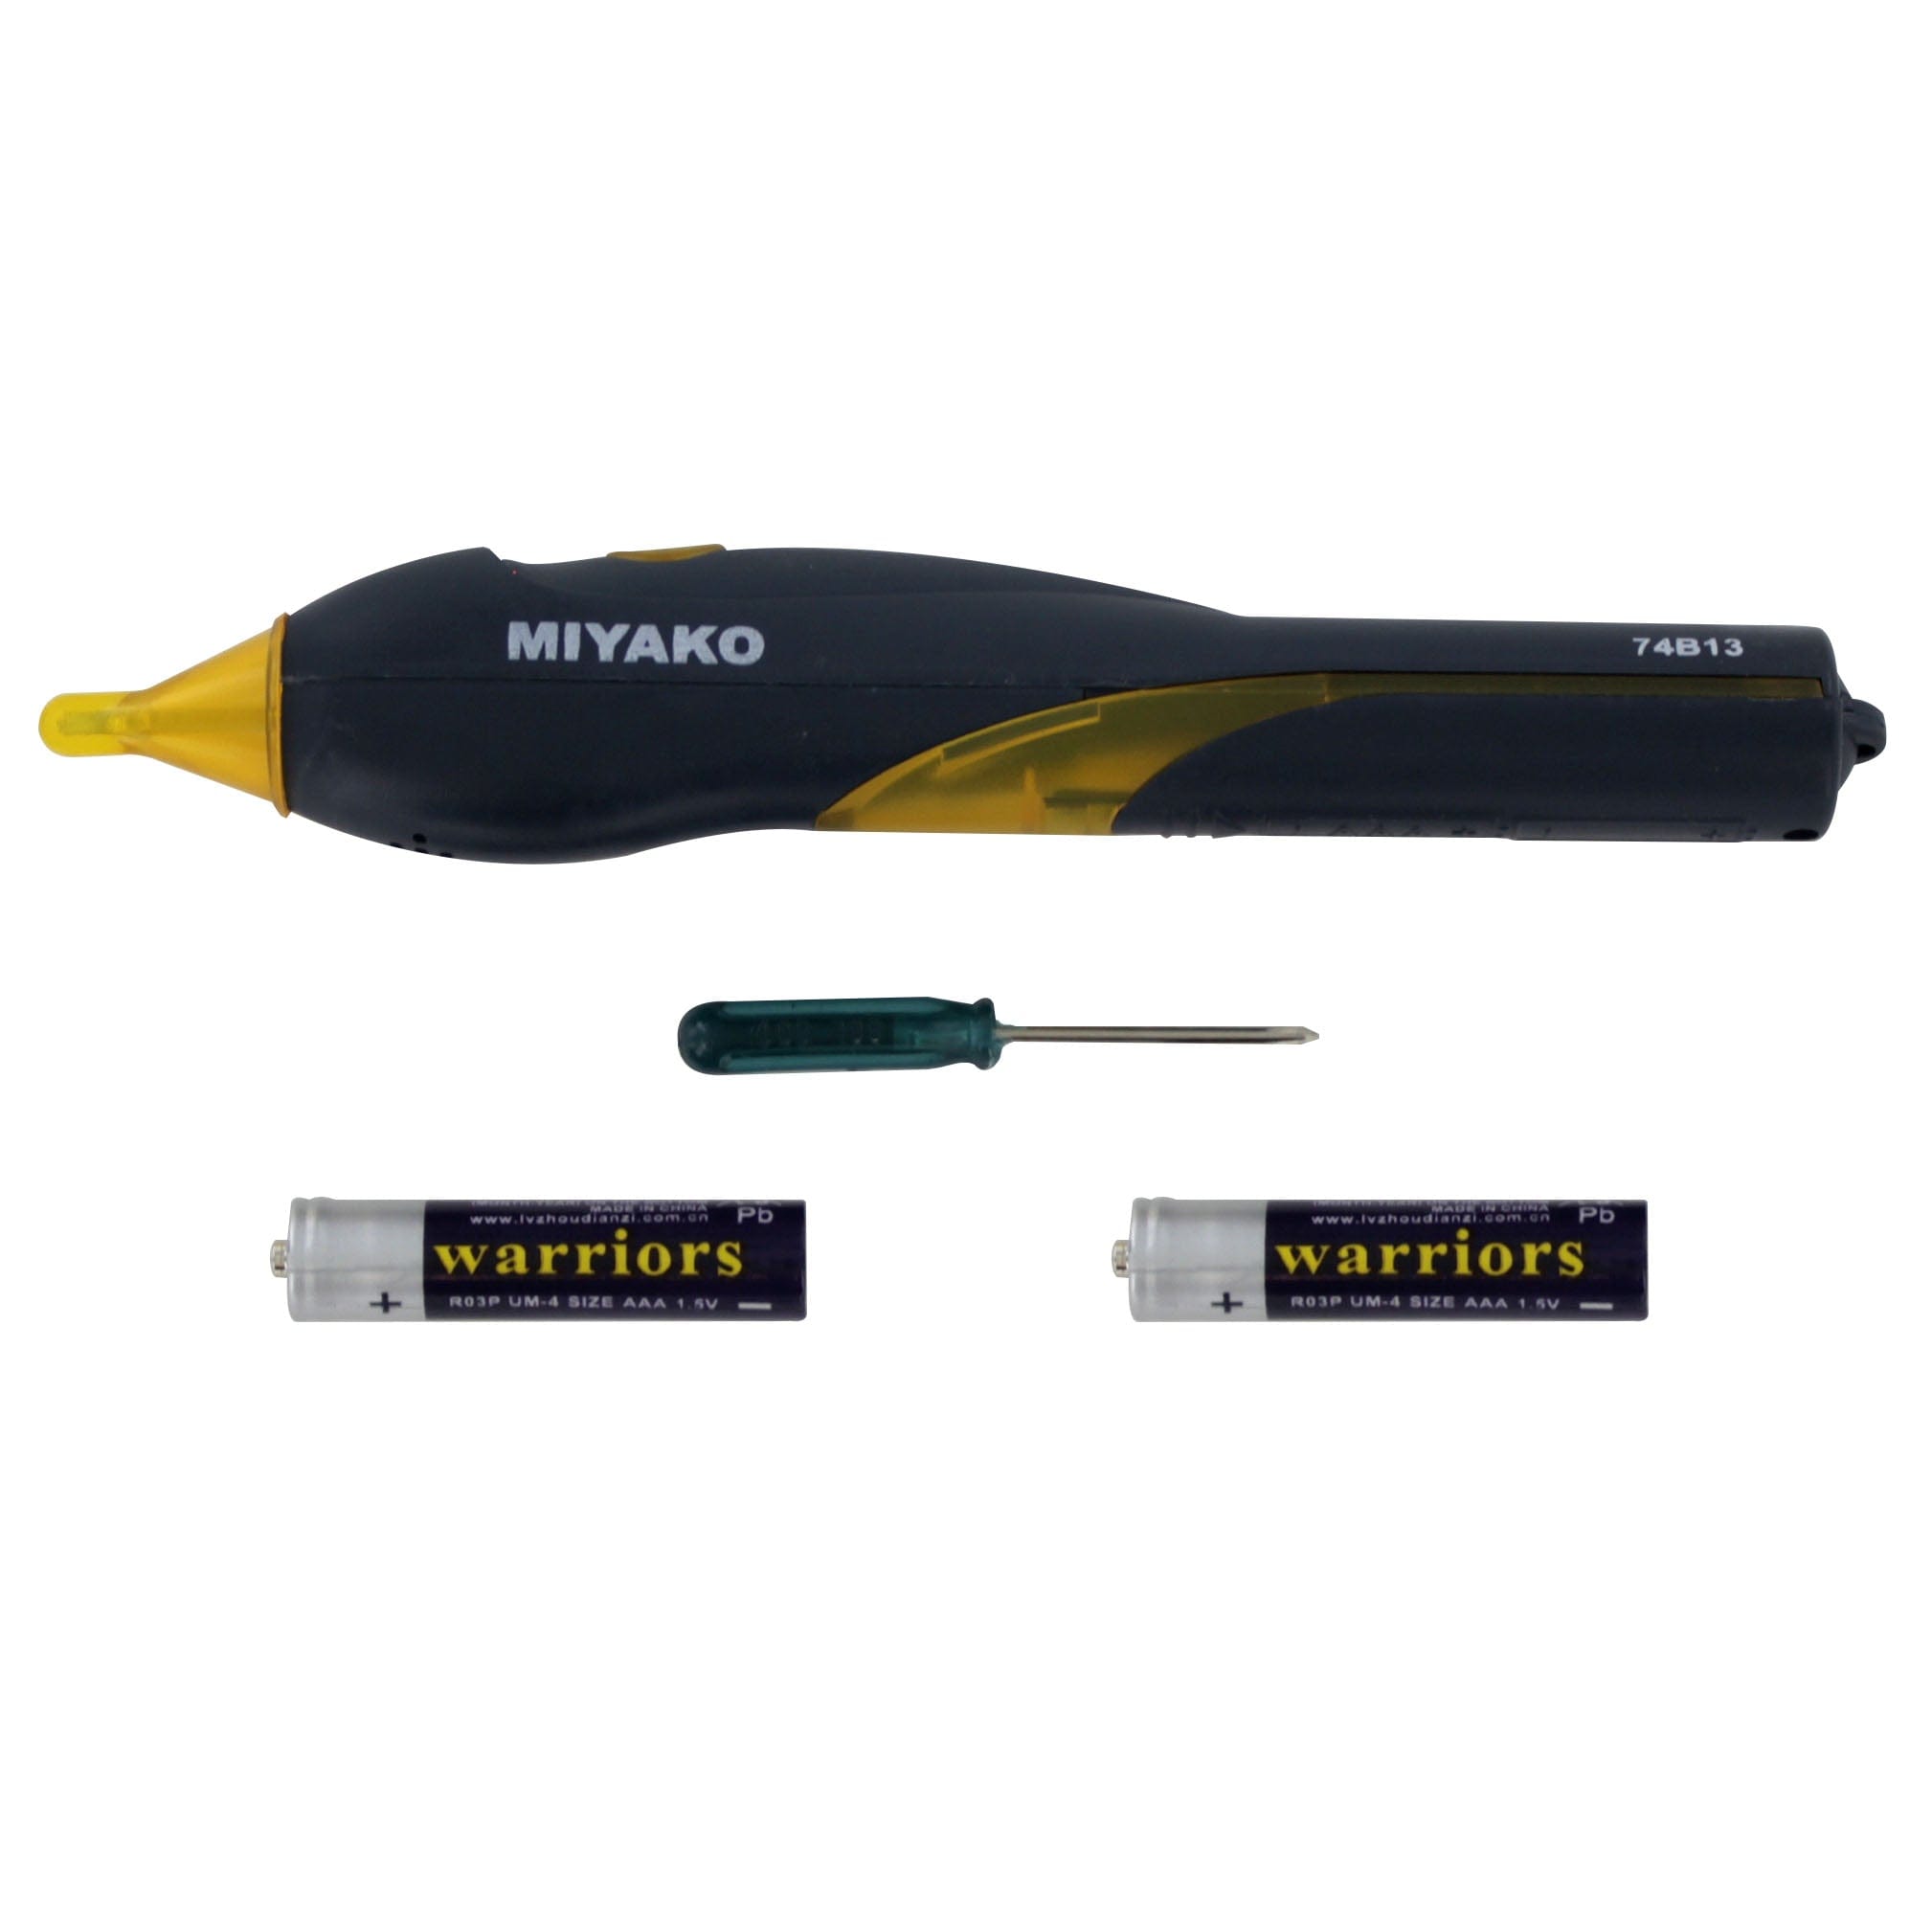 MIYAKO Non-Contact Dual Voltage Detector Pen Style AC Tester  This non-contact voltage detector uses non-contact detection technology to detect voltage in cables, cords, circuit brakers, lighting fixtures, switches, outlets and wires-74B 13